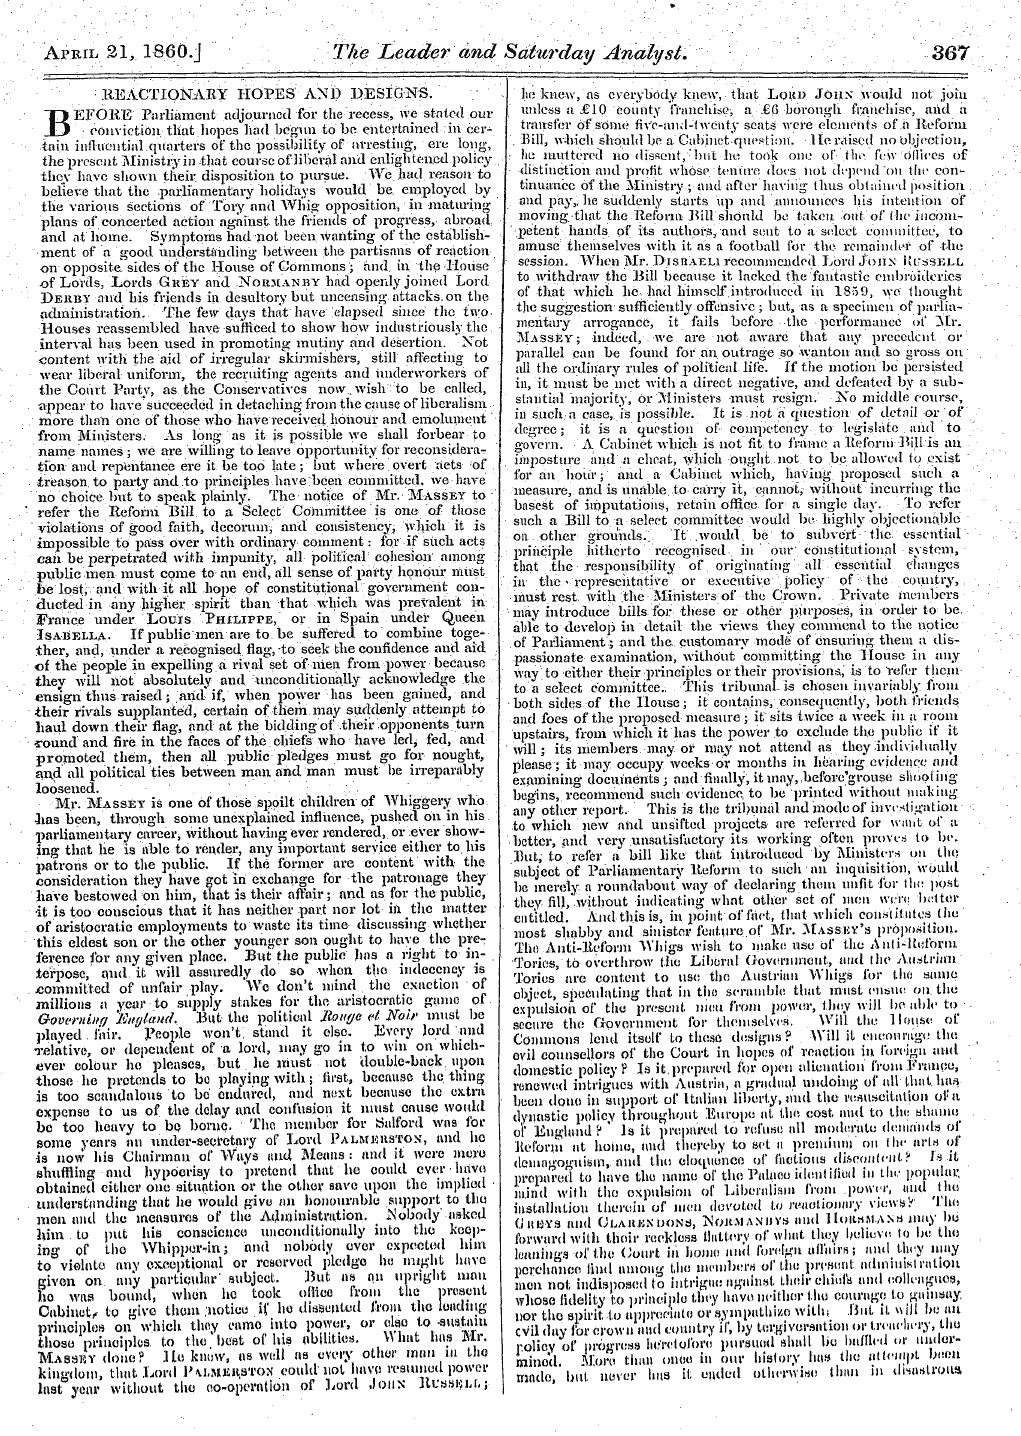 Leader (1850-1860): jS F Y, 2nd edition: 3